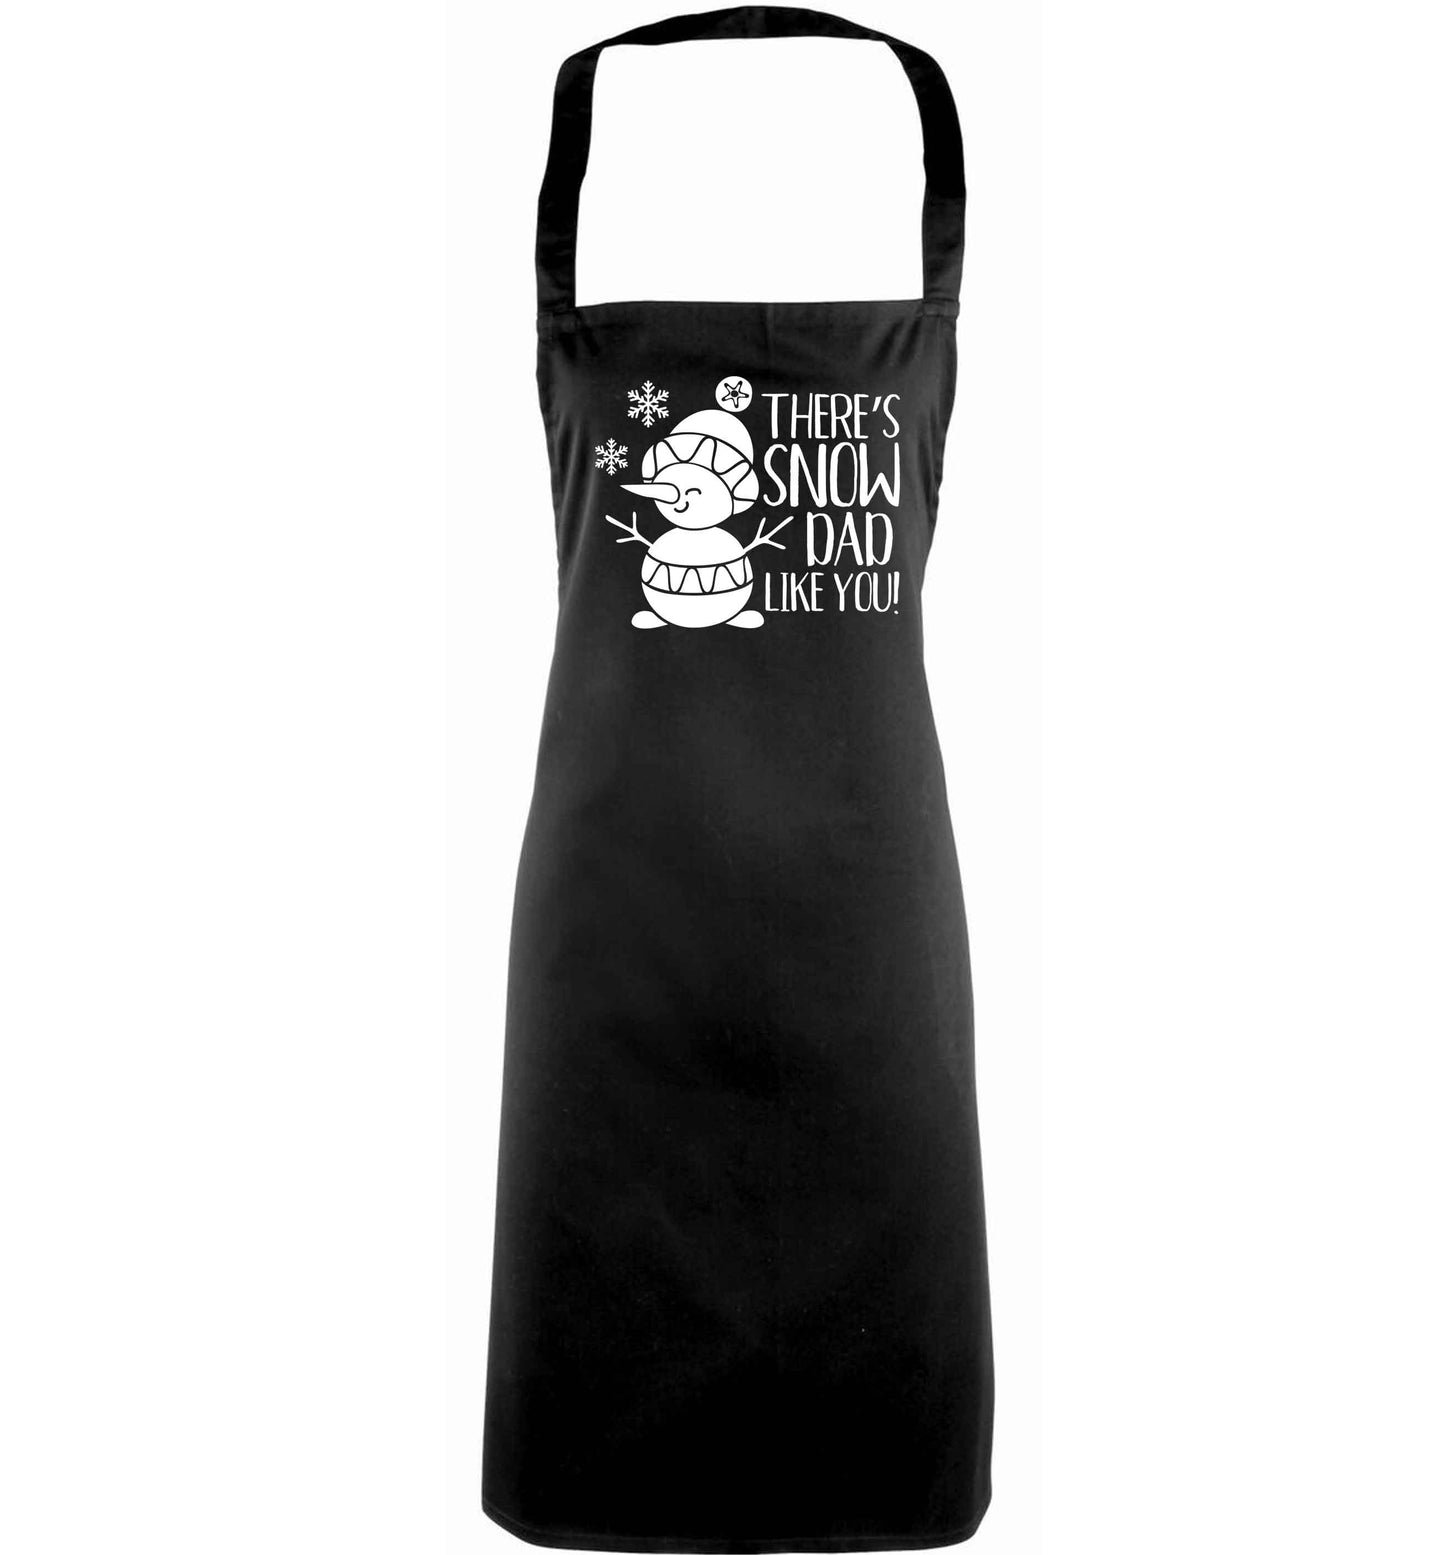 There's snow dad like you adults black apron